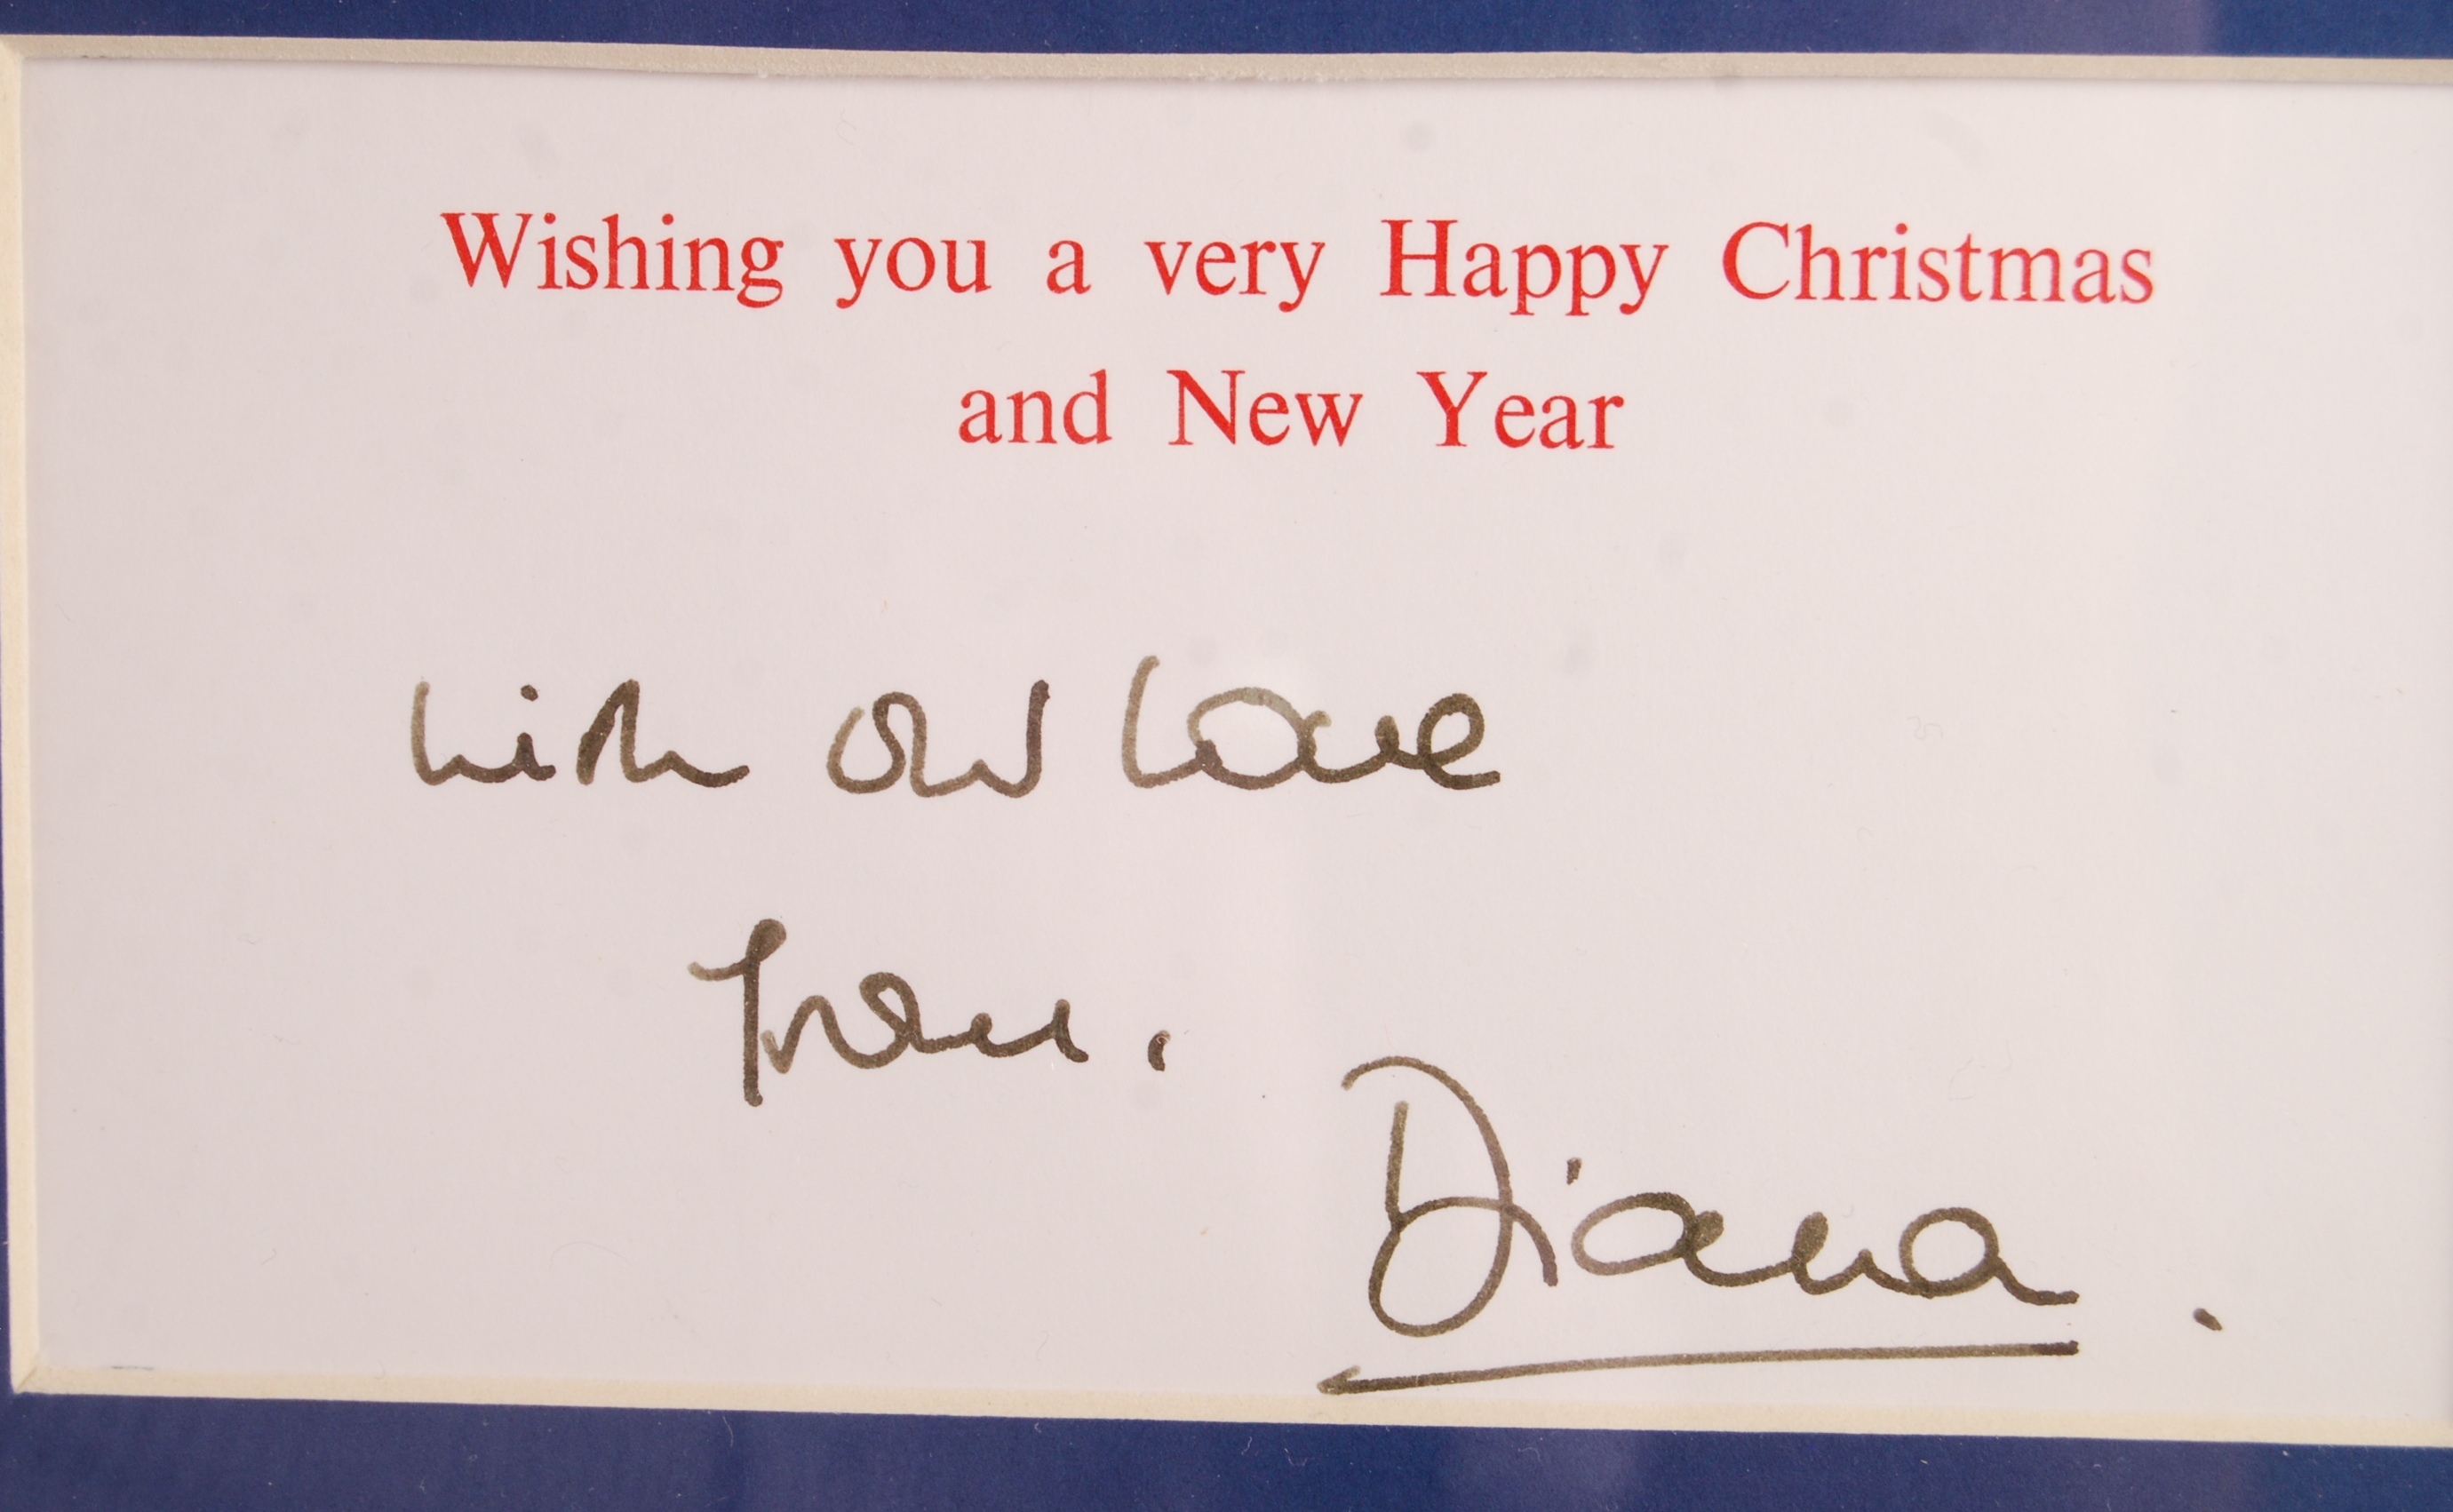 PRINCESS DIANA OFFICIAL ROYAL CHRISTMAS CARD 1991 WITH AUTOGRAPH - Image 2 of 3